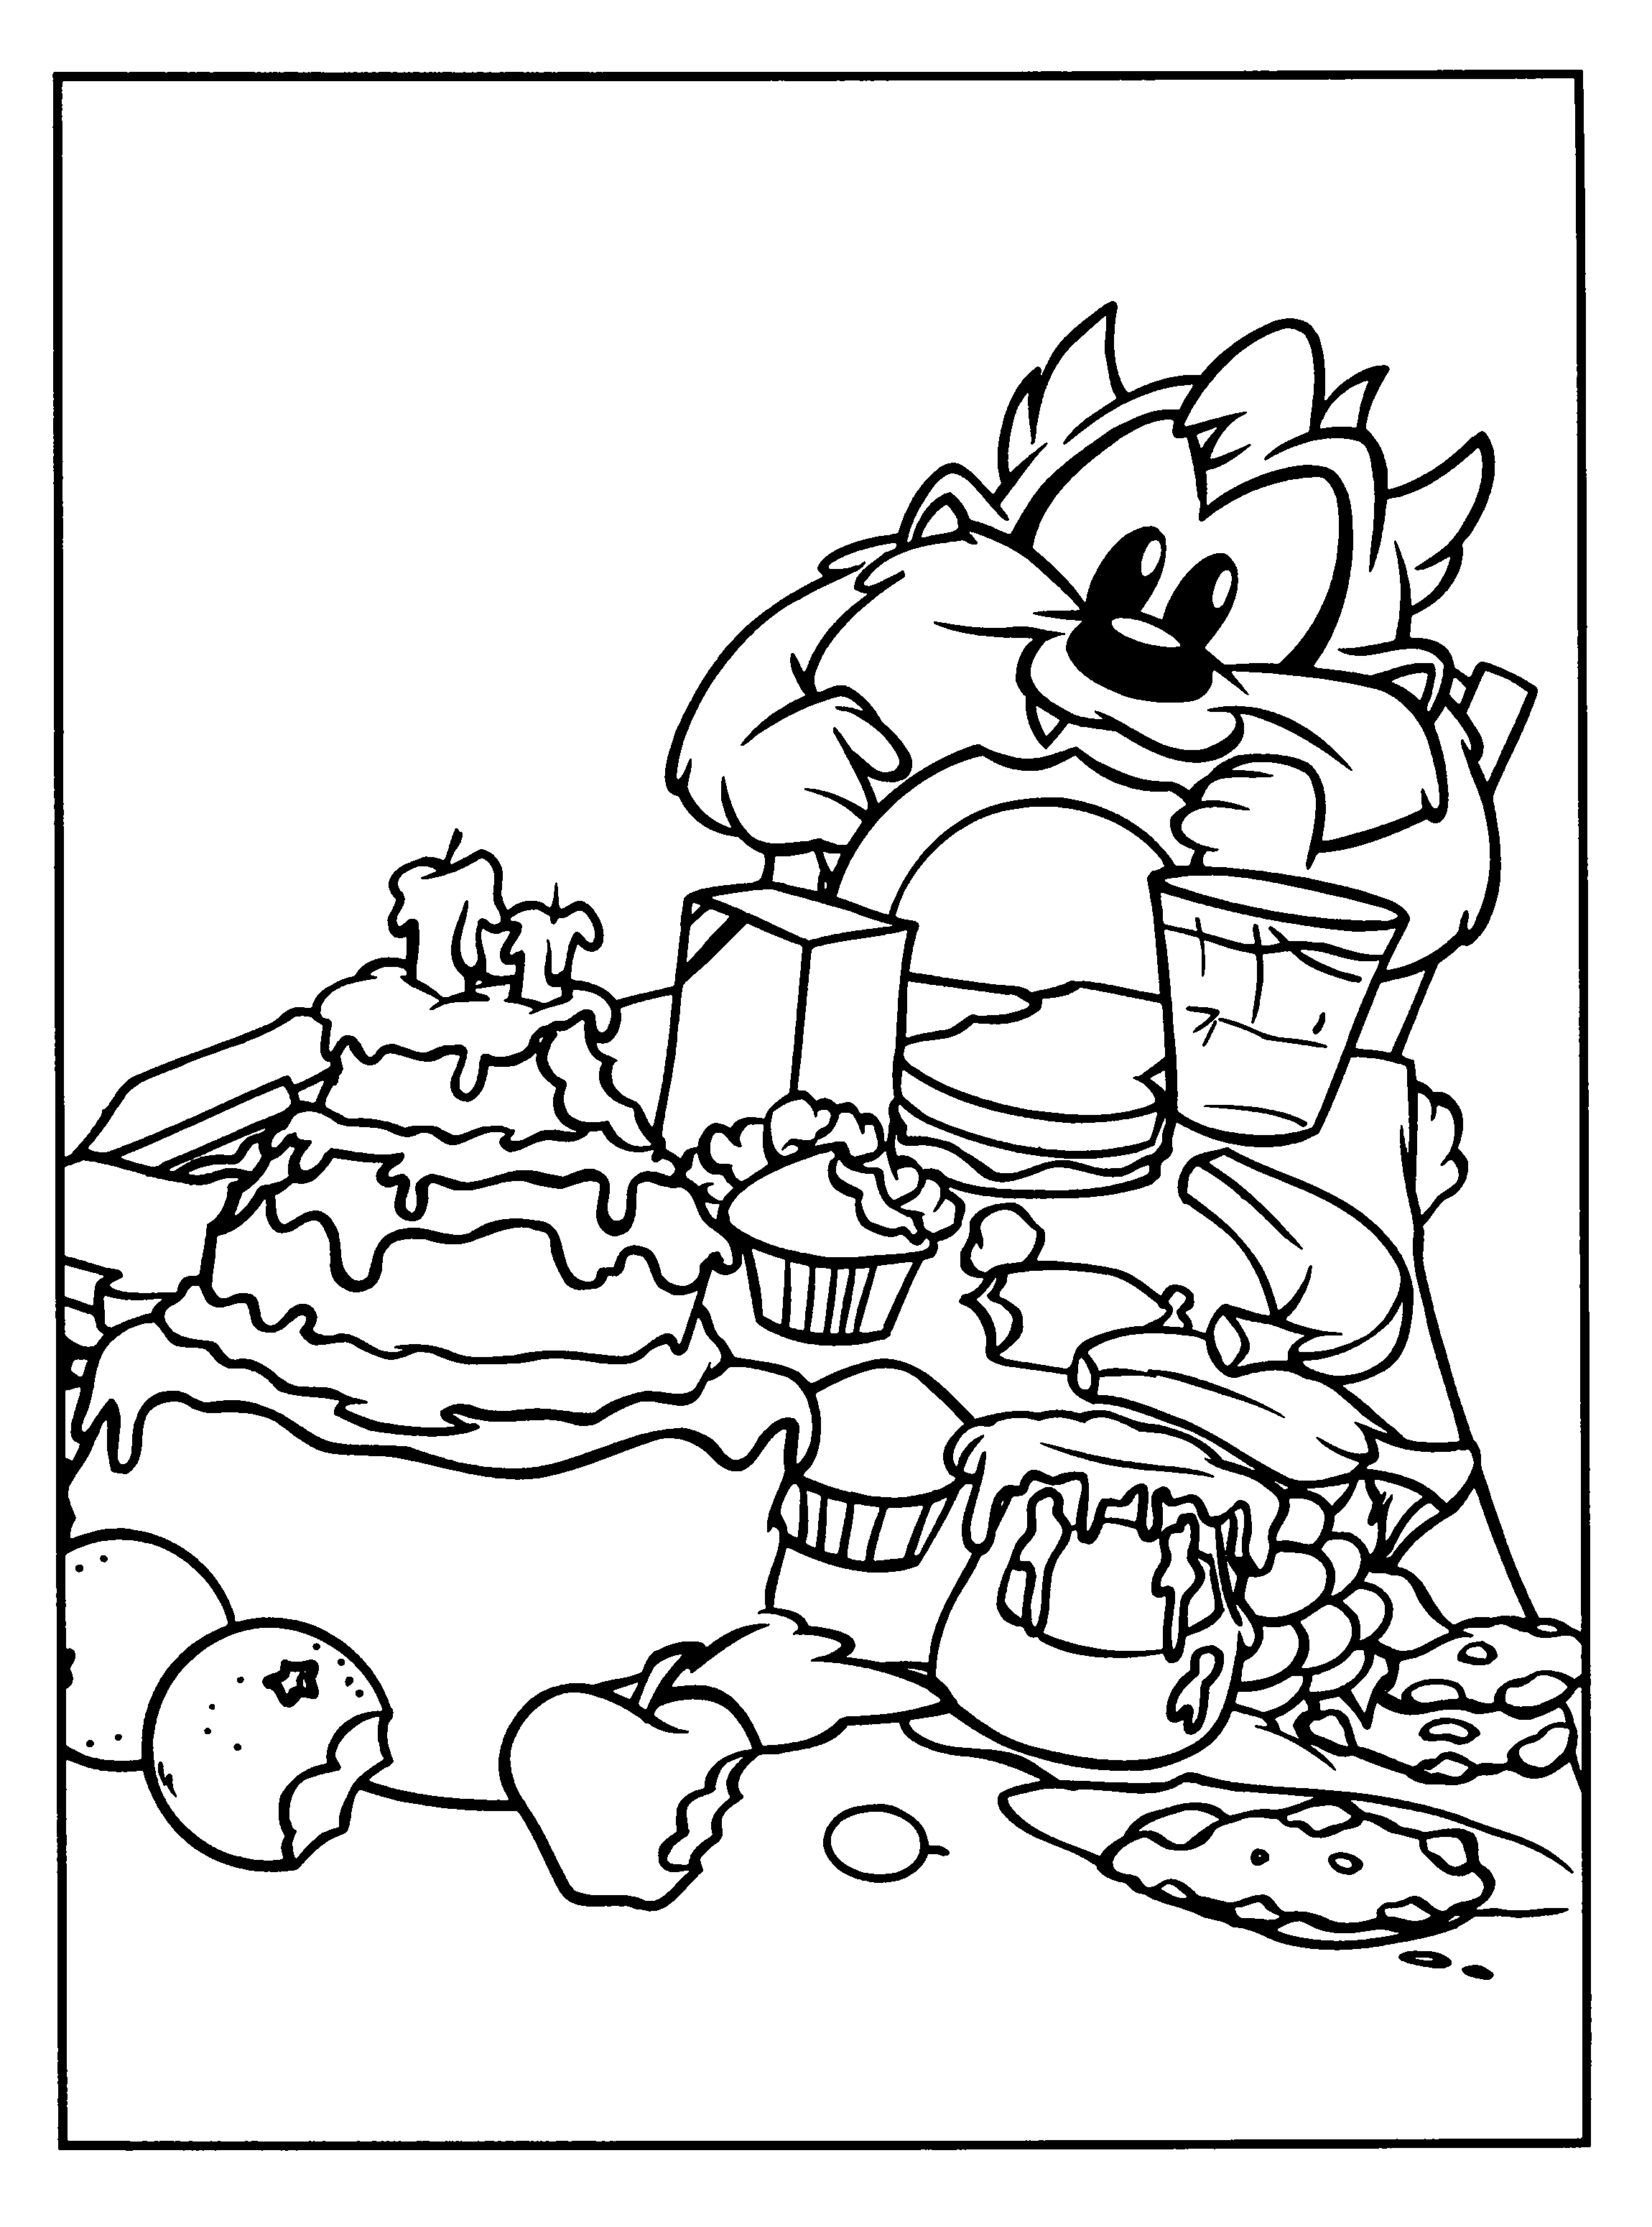 Coloring Page - Baby looney tunes coloring pages 14